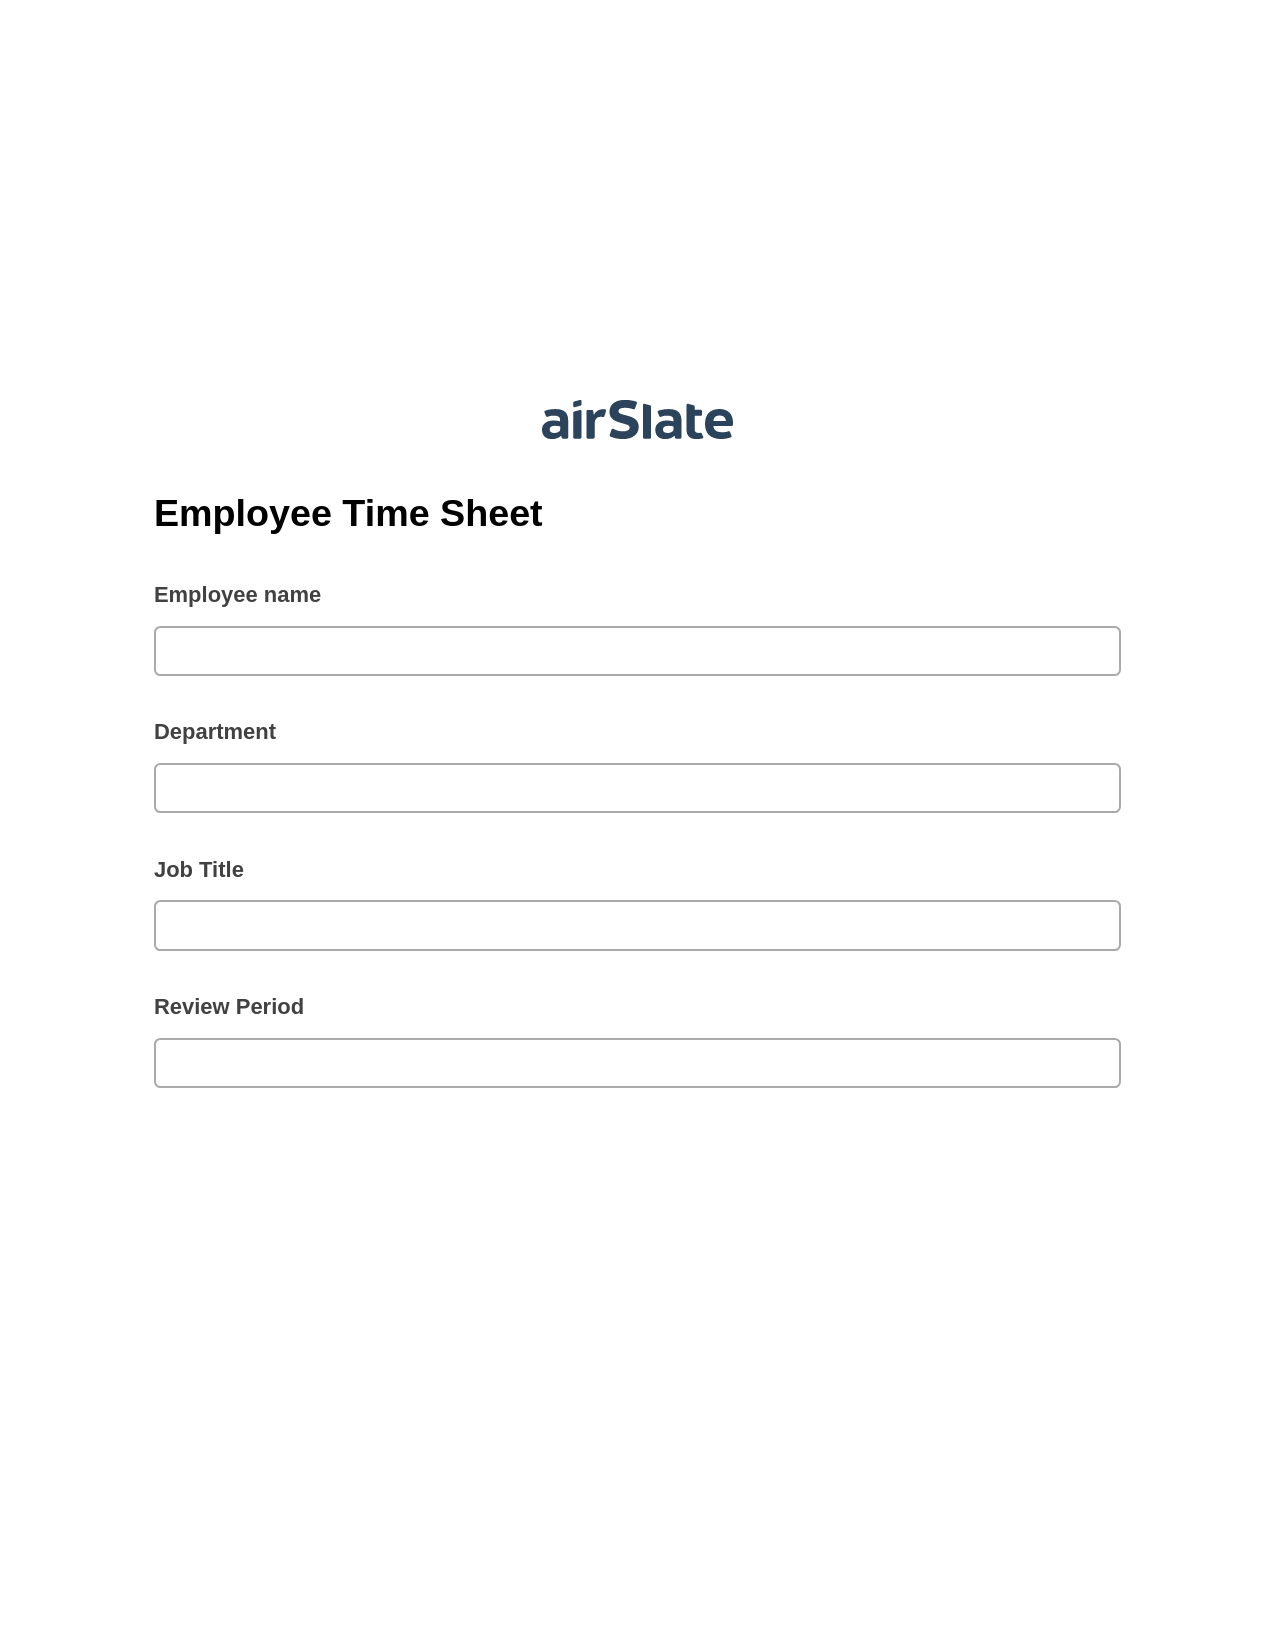 Multirole Employee Time Sheet Pre-fill from Google Sheets Bot, Create slate addon, Export to NetSuite Bot